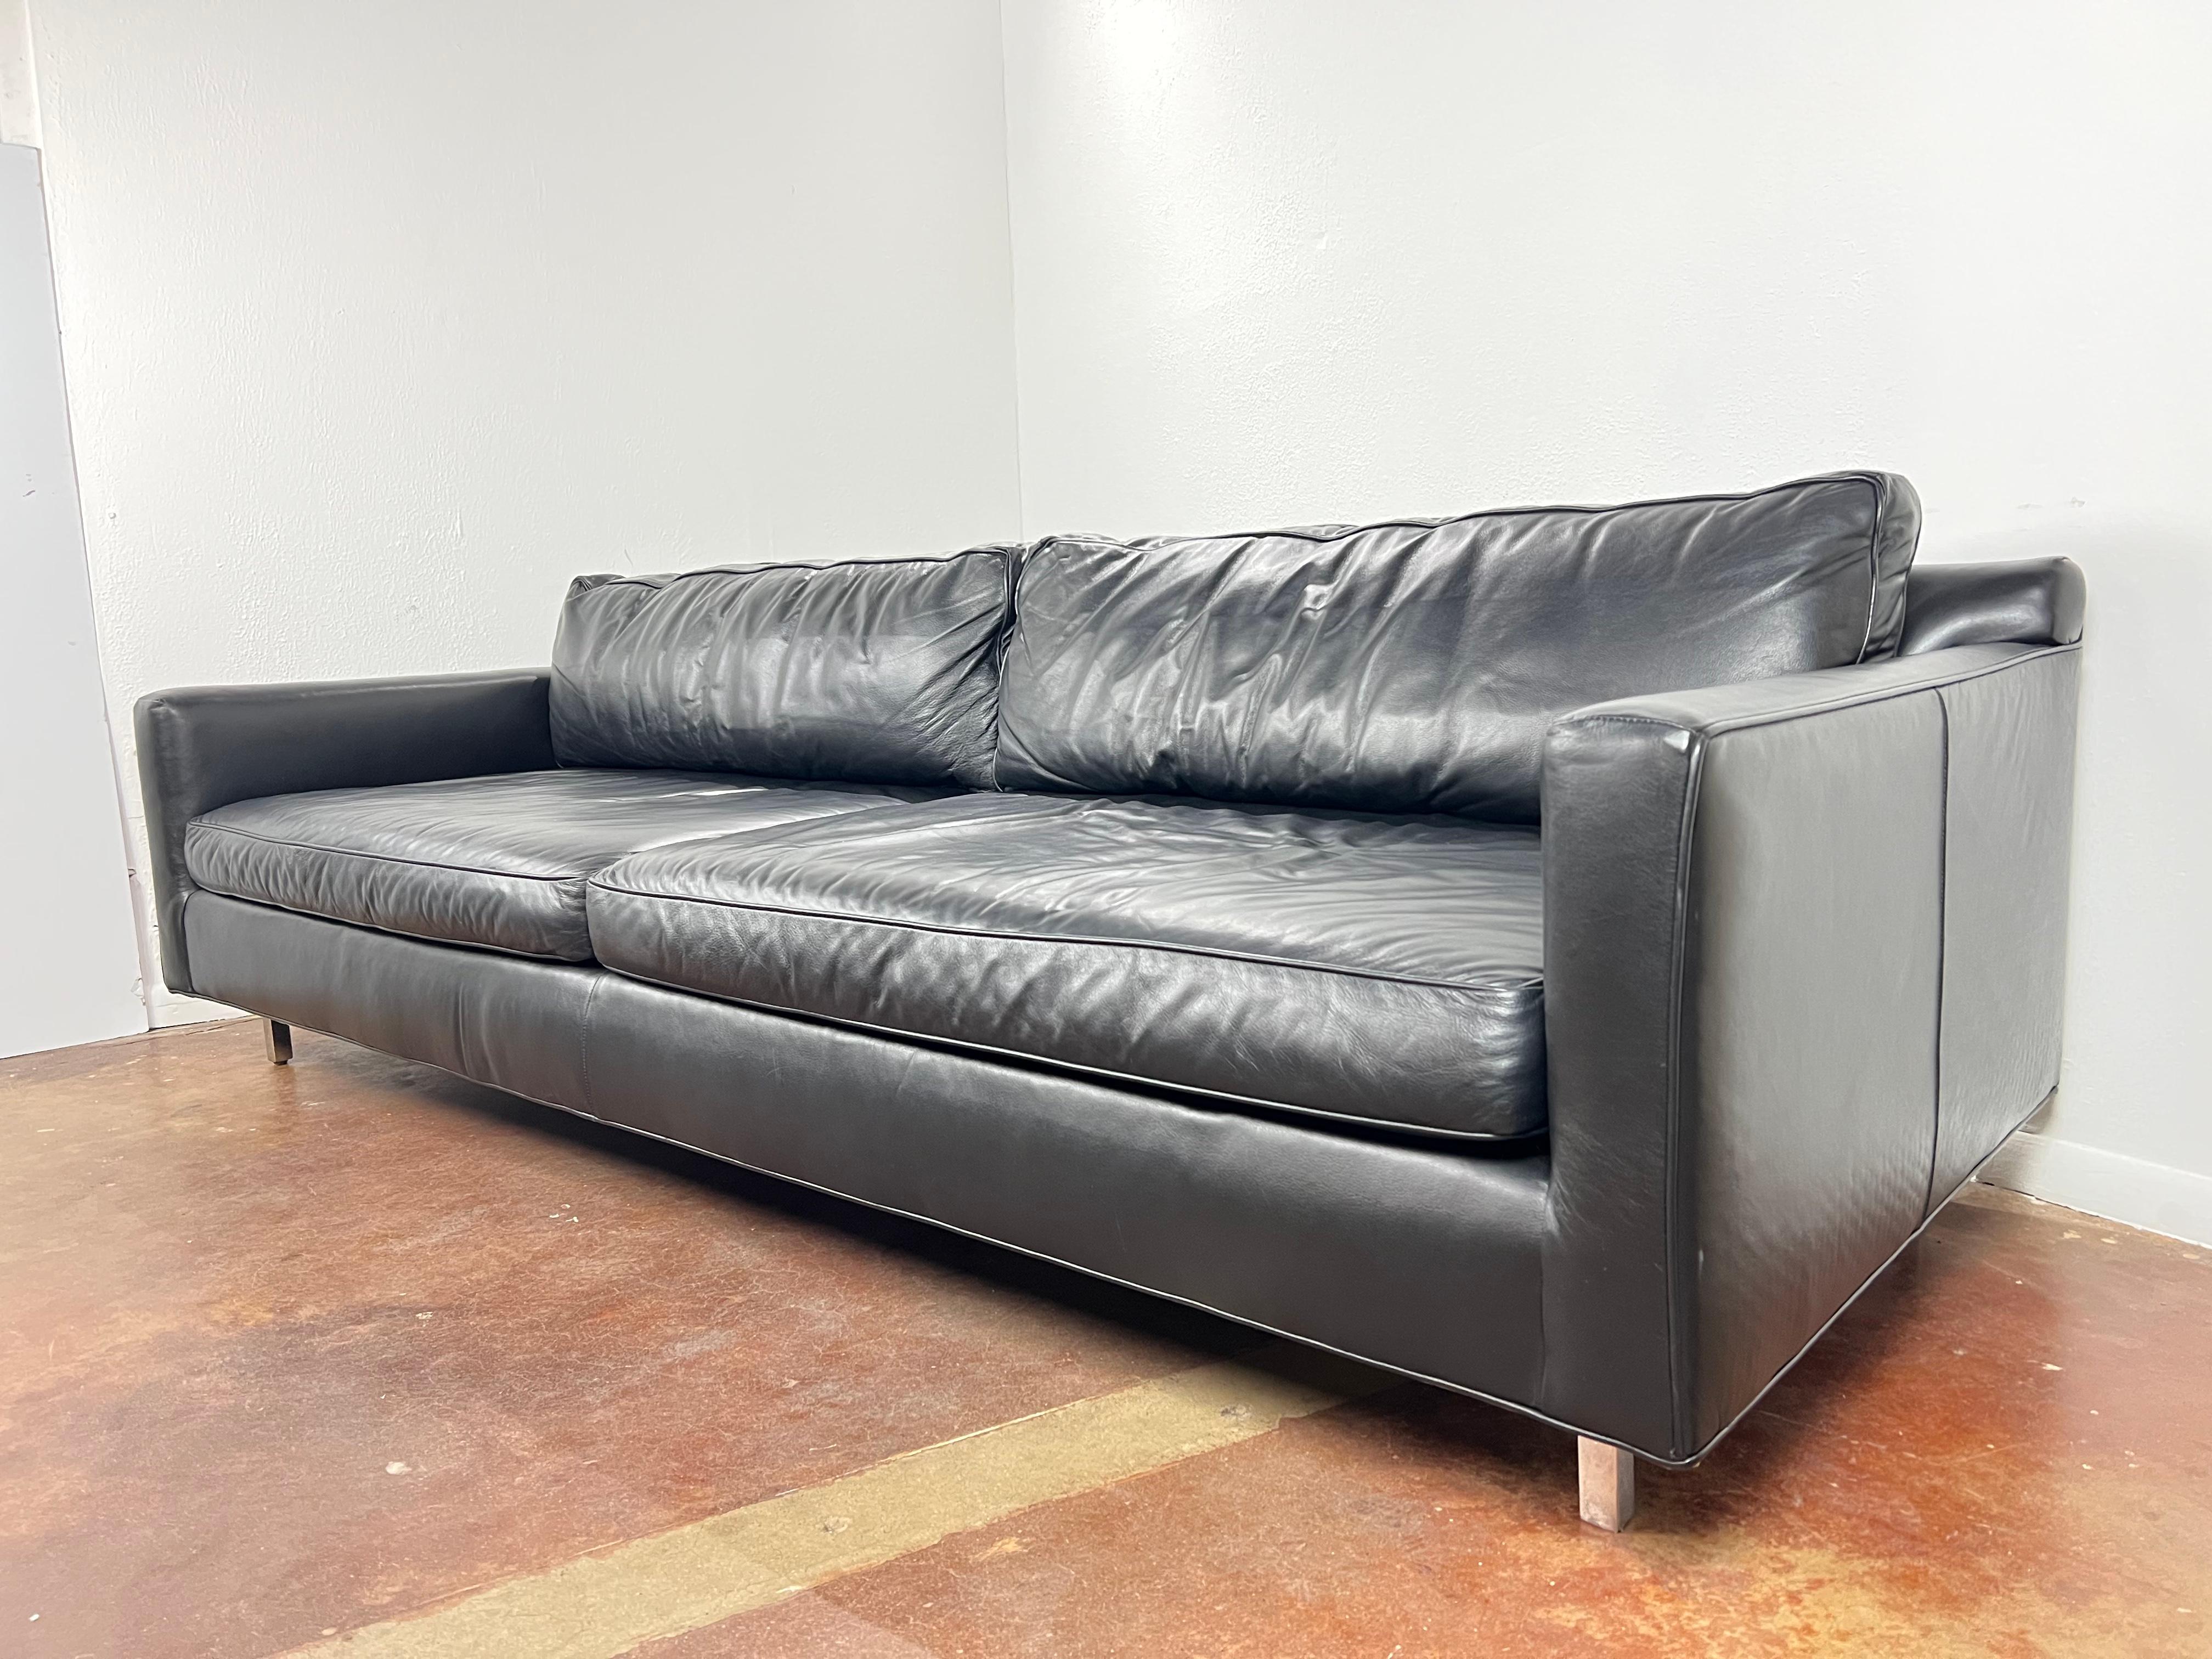 Low and luxe modern sofa in specially treated black performance Italian leather from Mitchell Gold + Bob Williams. Lush seat and back cushions make it especially comfortable. Square polished stainless steel legs. Sinuous wire spring suspension and